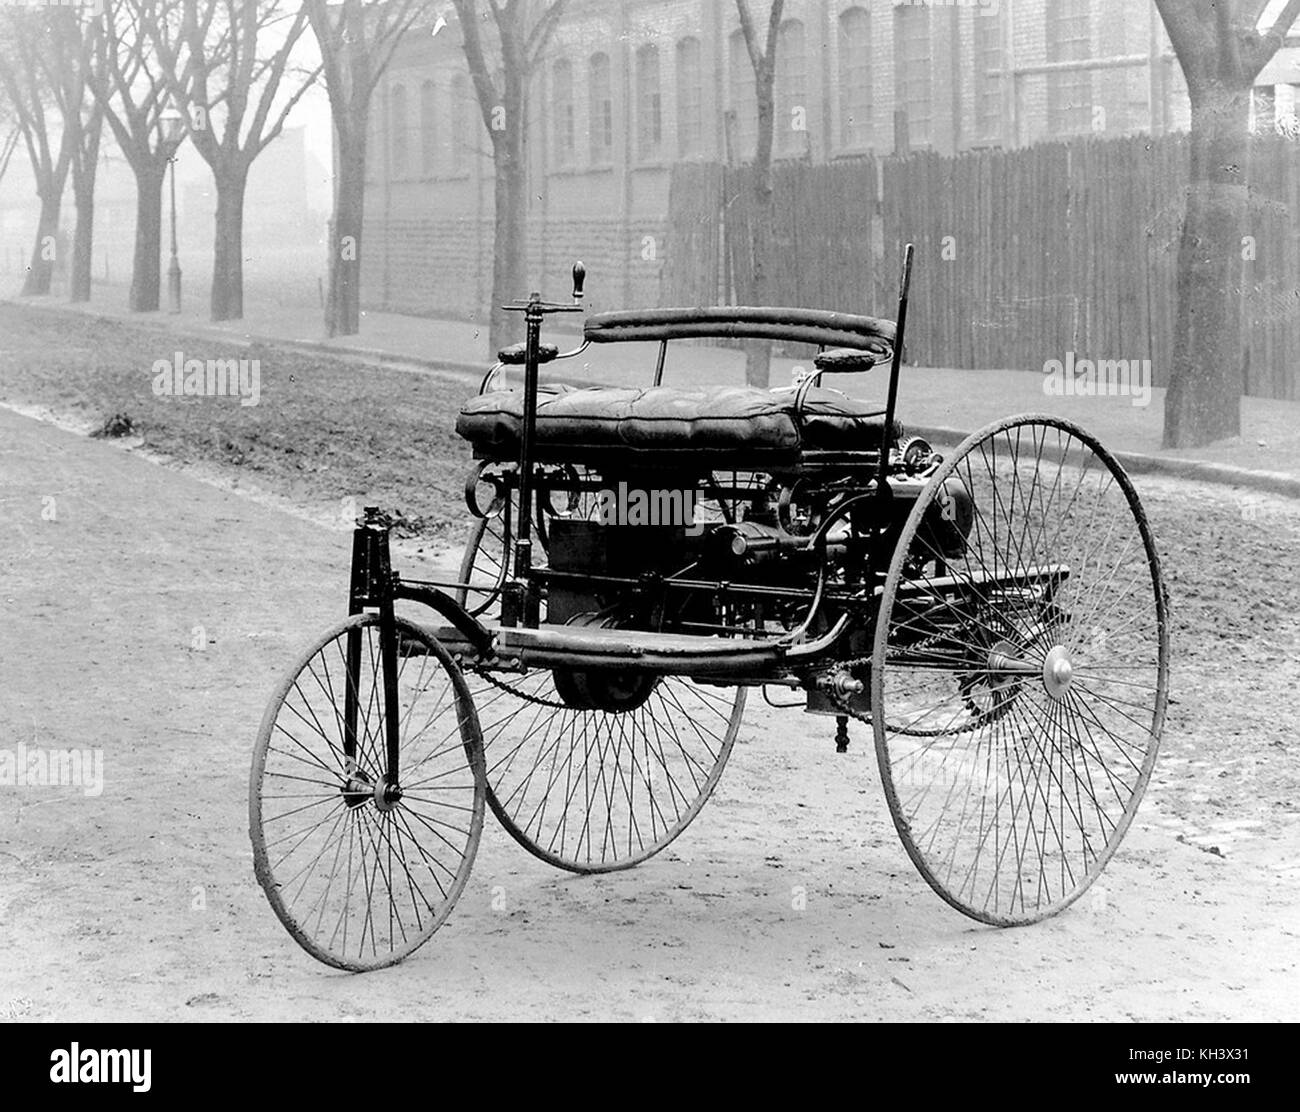 The Benz Patent Motorwagen built in 1885, the world's first automobile Stock Photo